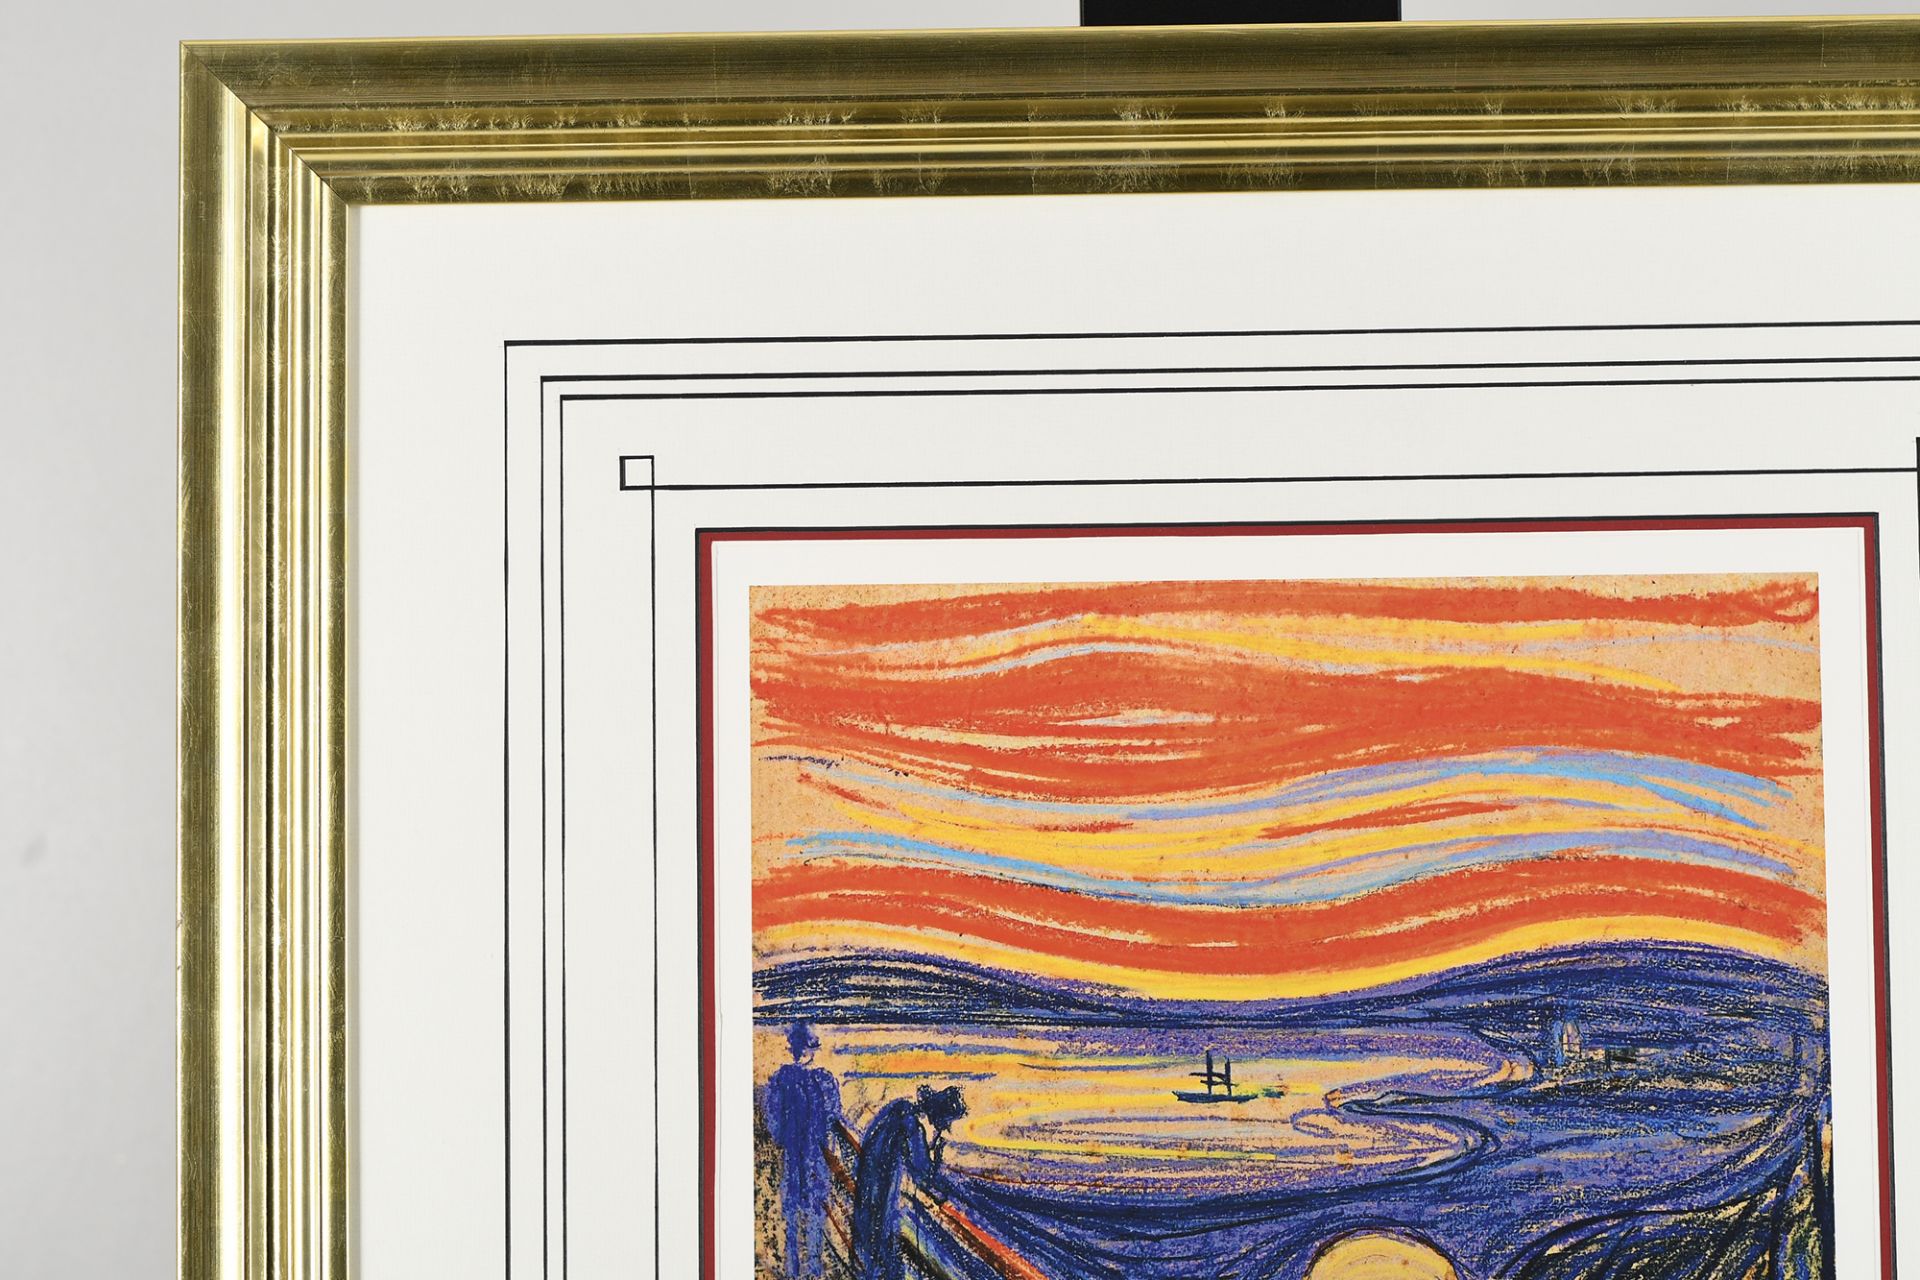 Edvard Munch Limited Edition "The Scream" - Image 8 of 10